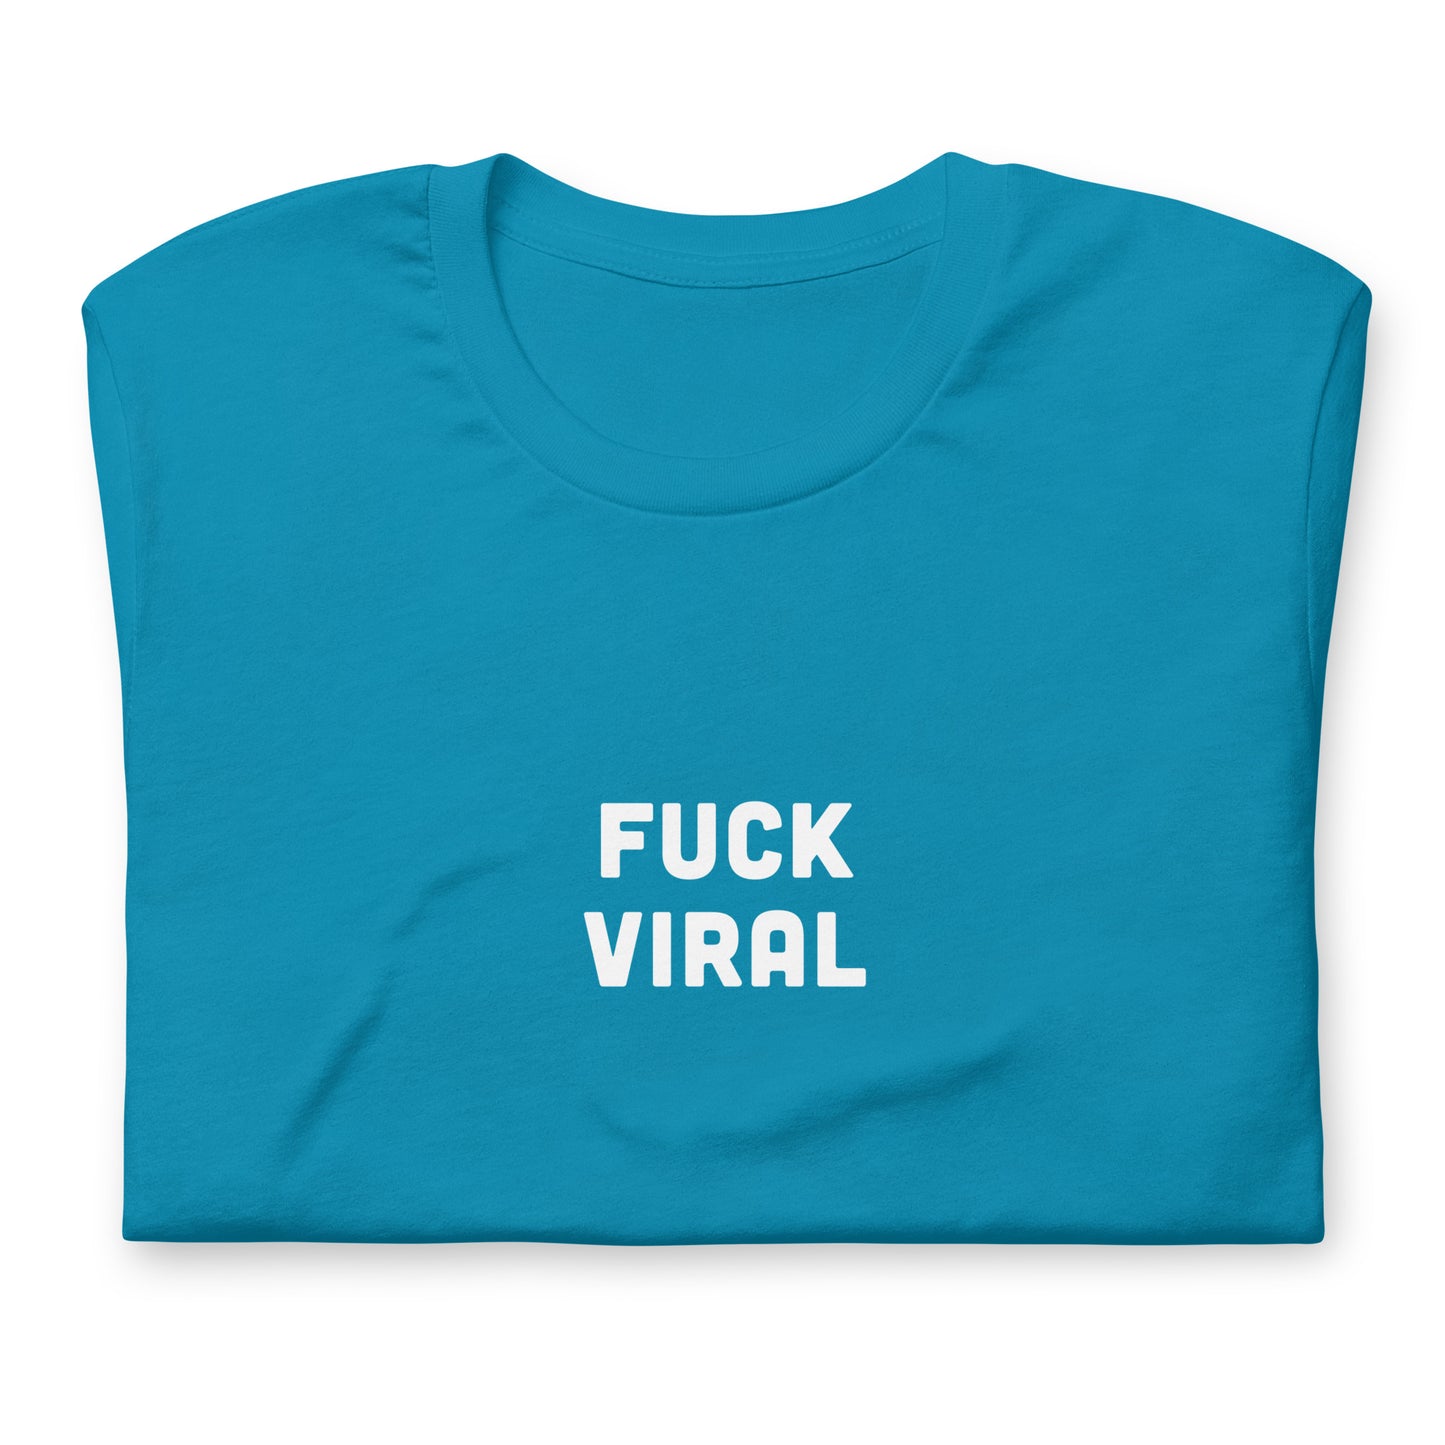 Fuck Viral T-Shirt Size M Color Navy